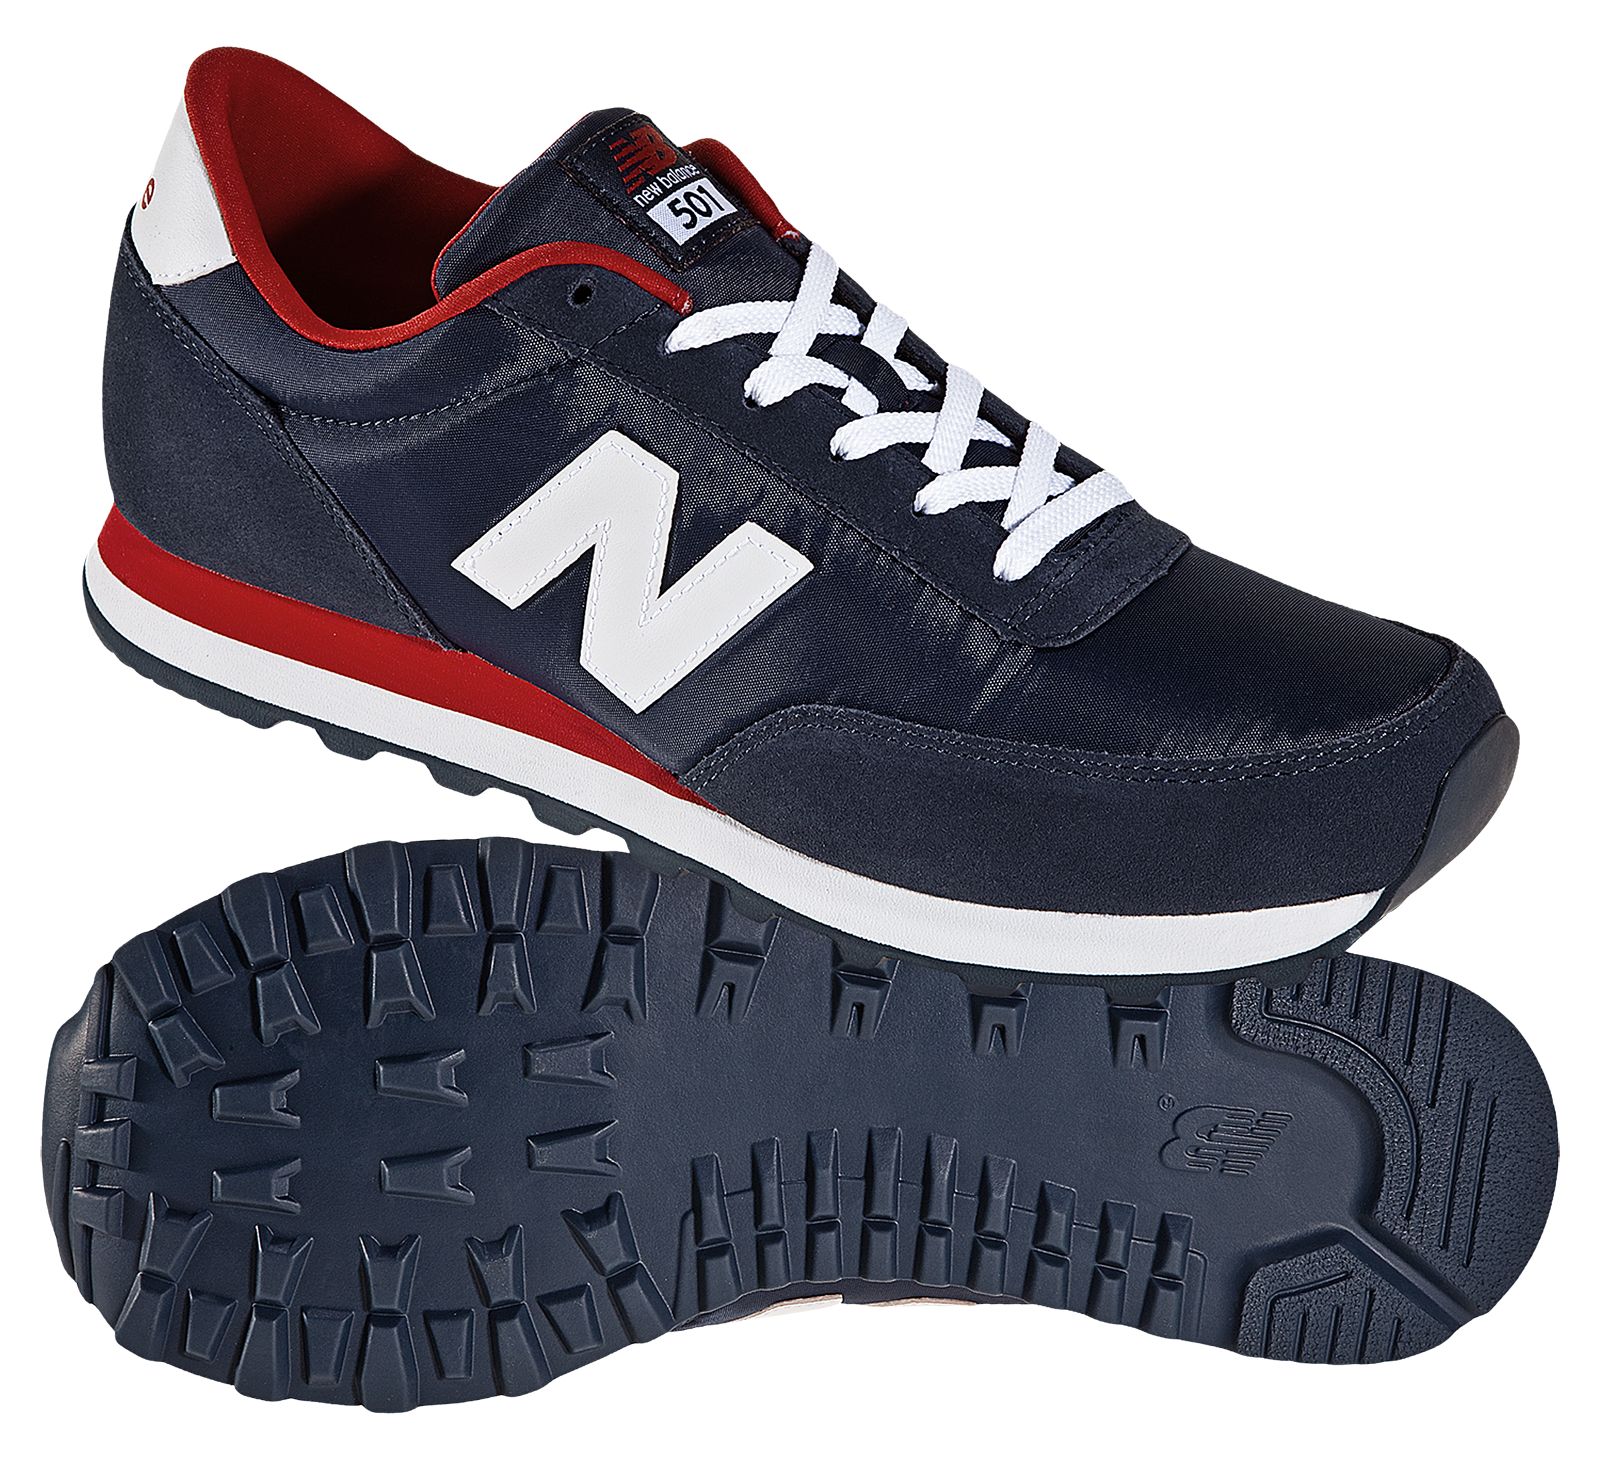 New Balance ML501 on Sale - Discounts Up to 53% Off on ML501NRW at Joe's  New Balance Outlet